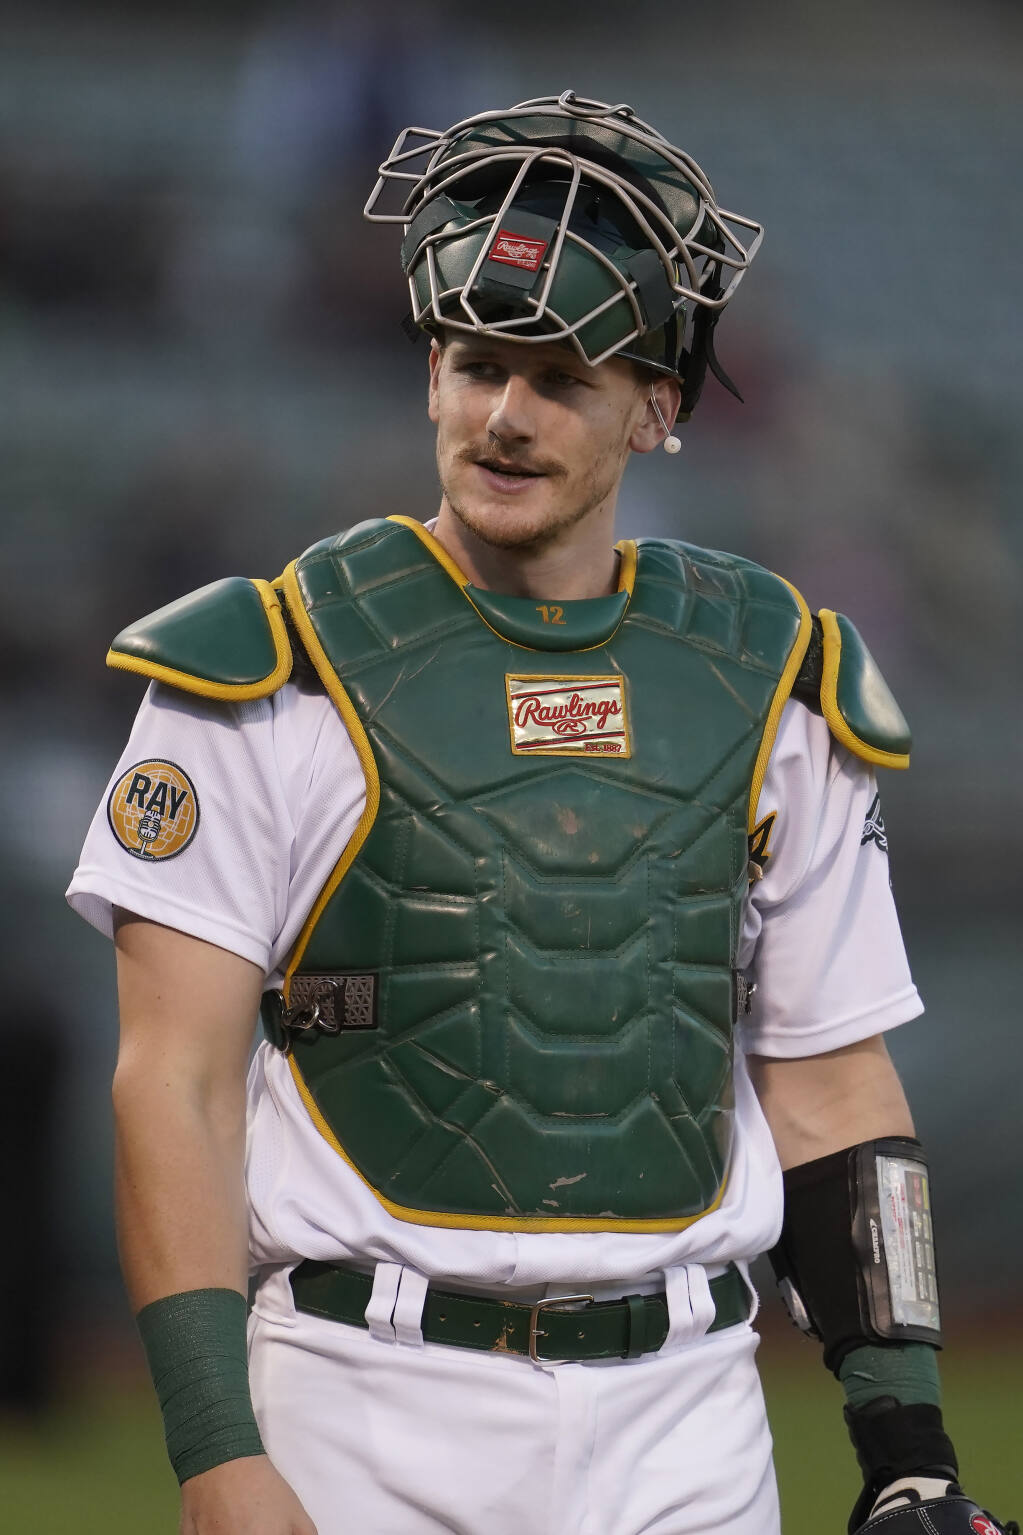 Sean Murphy should have won the Gold Glove - Athletics Nation